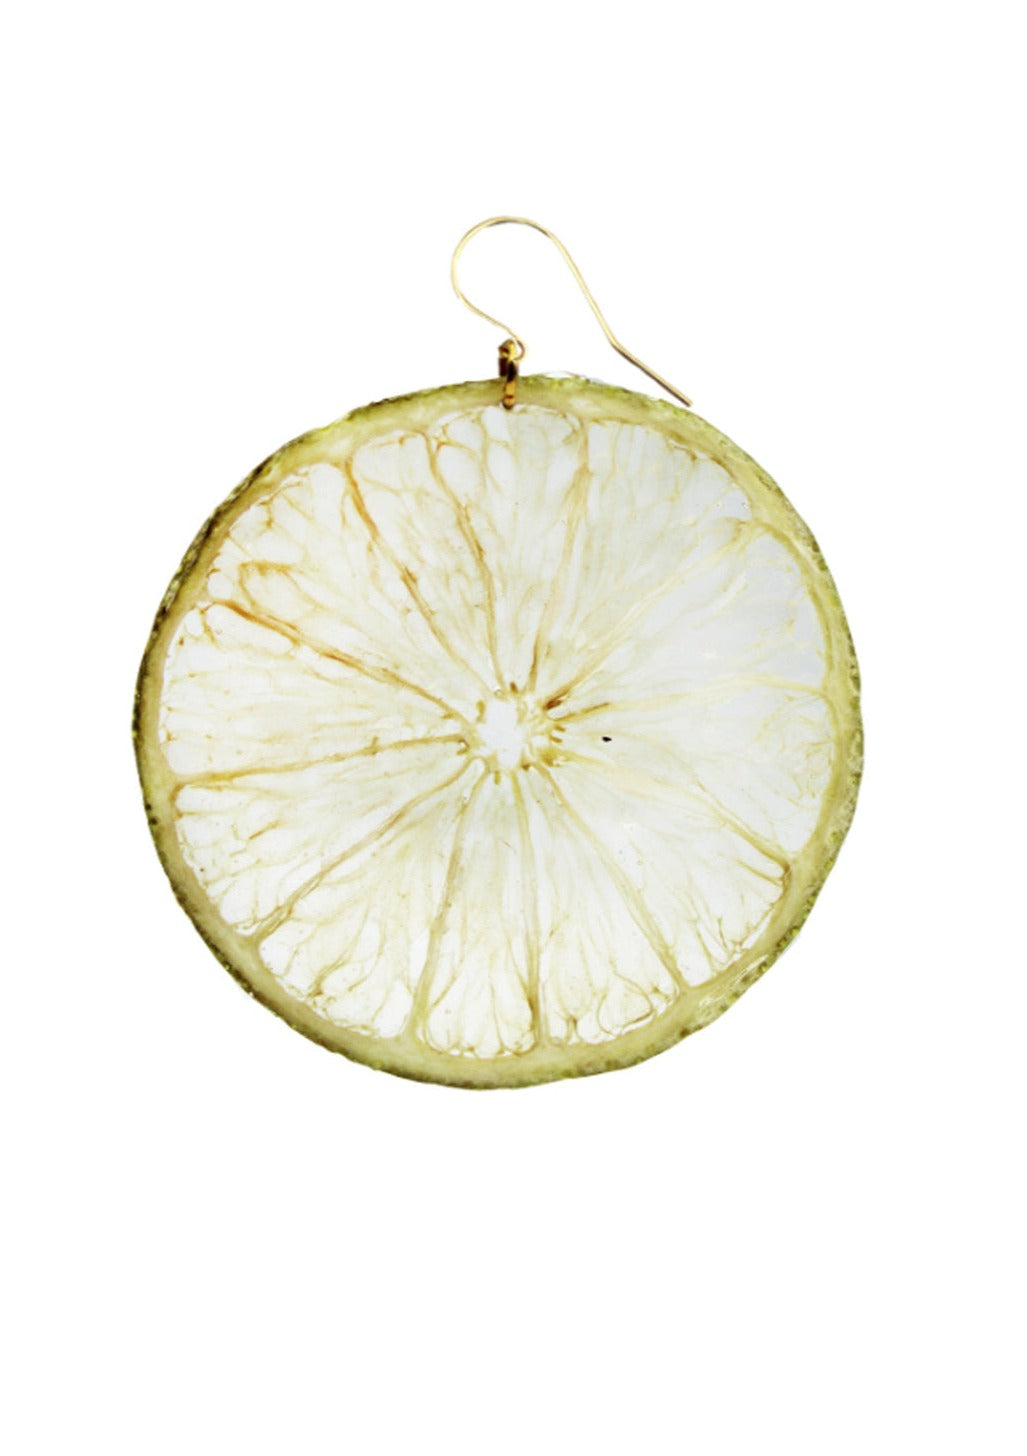 Resin Coated Slice of Lime on a French Hook Earring